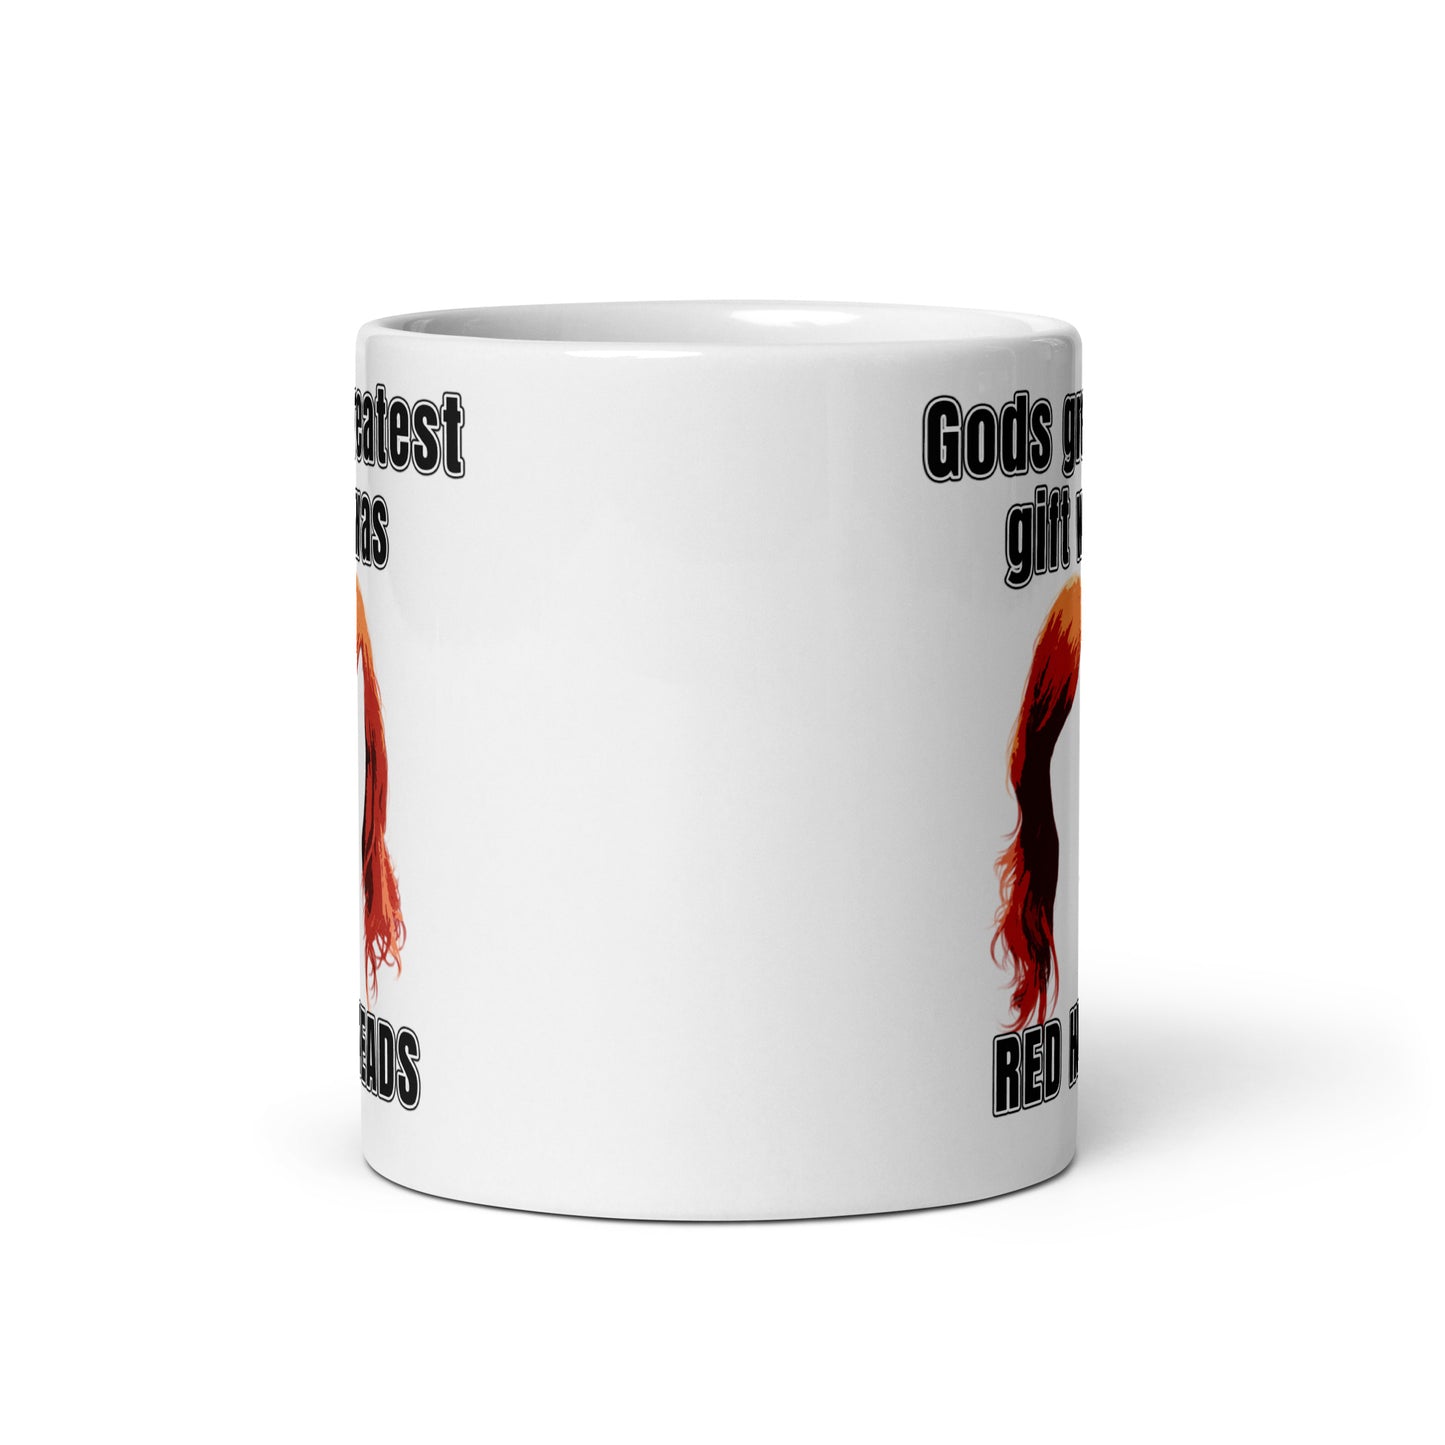 Gods greatest gift was RED HEADS - White glossy mug ginger god mothers day red hair red head